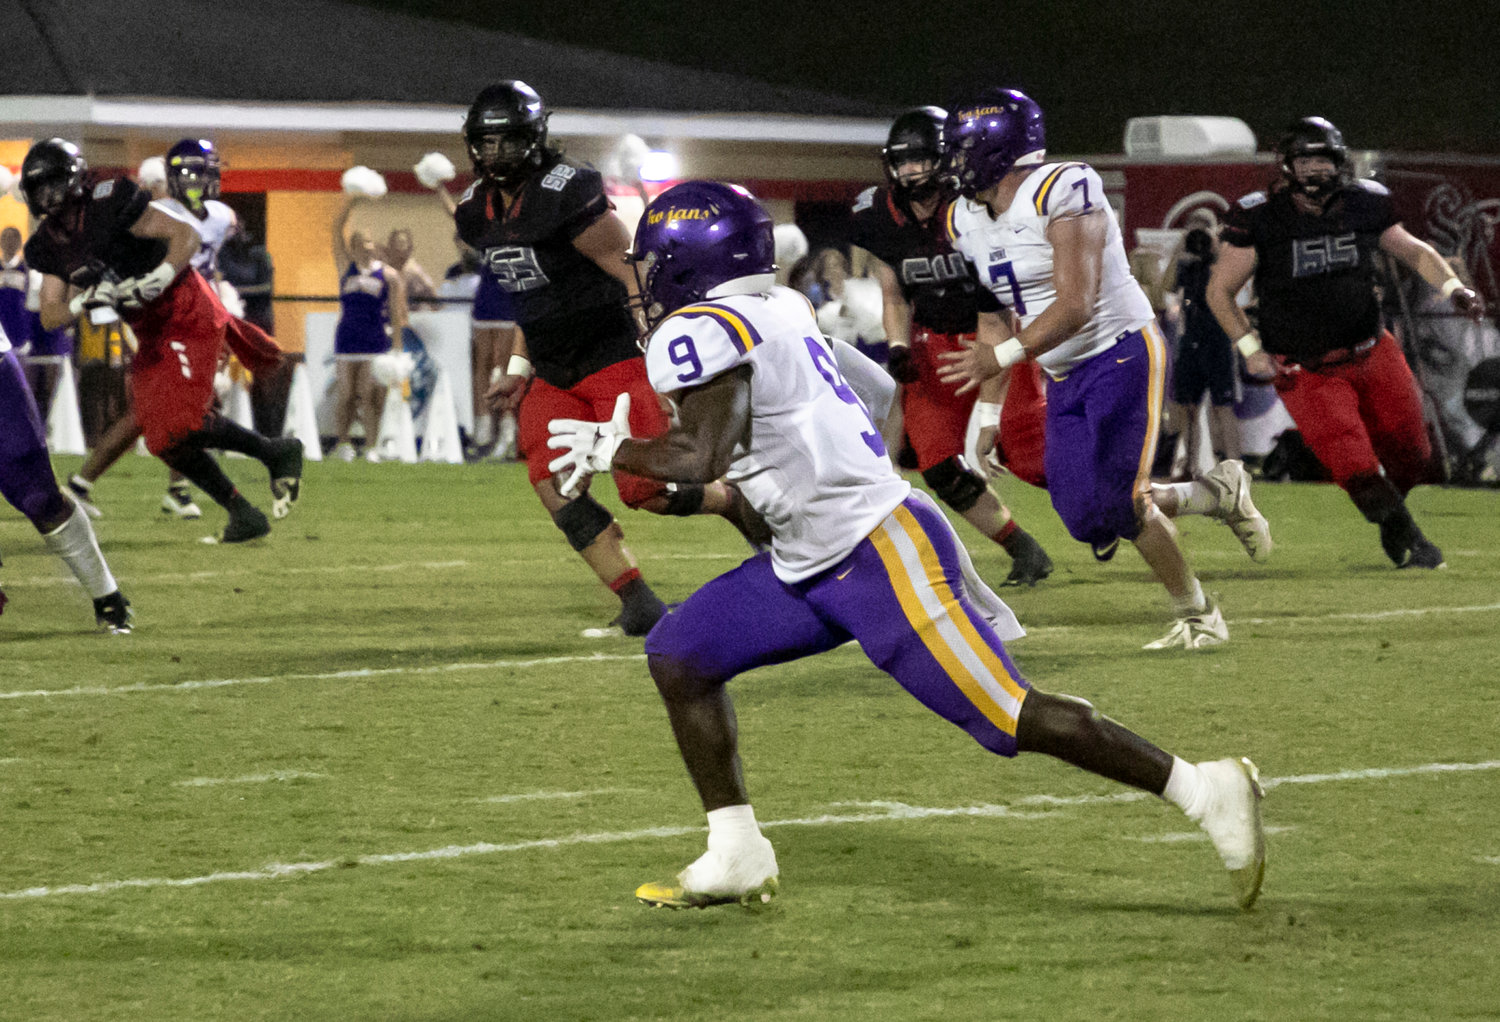 Daphne senior Cam Long races an interception the other way during the Trojans’ non-region away contest against the Spanish Fort Toros Friday, Sept. 23.